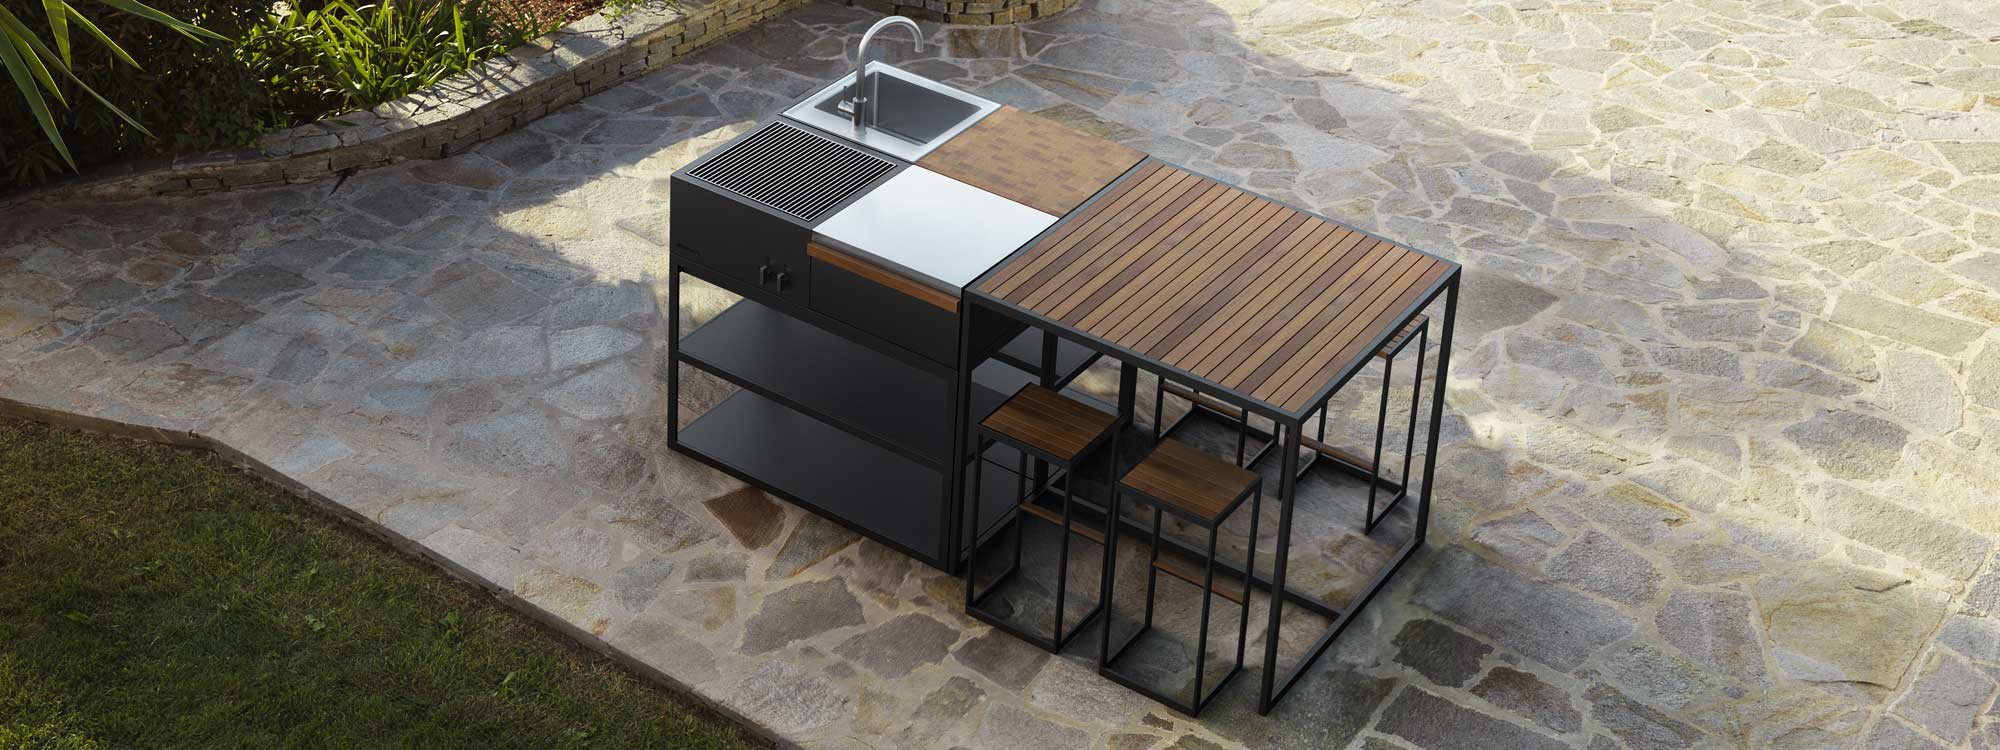 Image of aerial view of configuration of Open Kitchen bbq and outdoor sink, together with Open Bistro high bar table and bar stools in teak and anthracite stainless steel